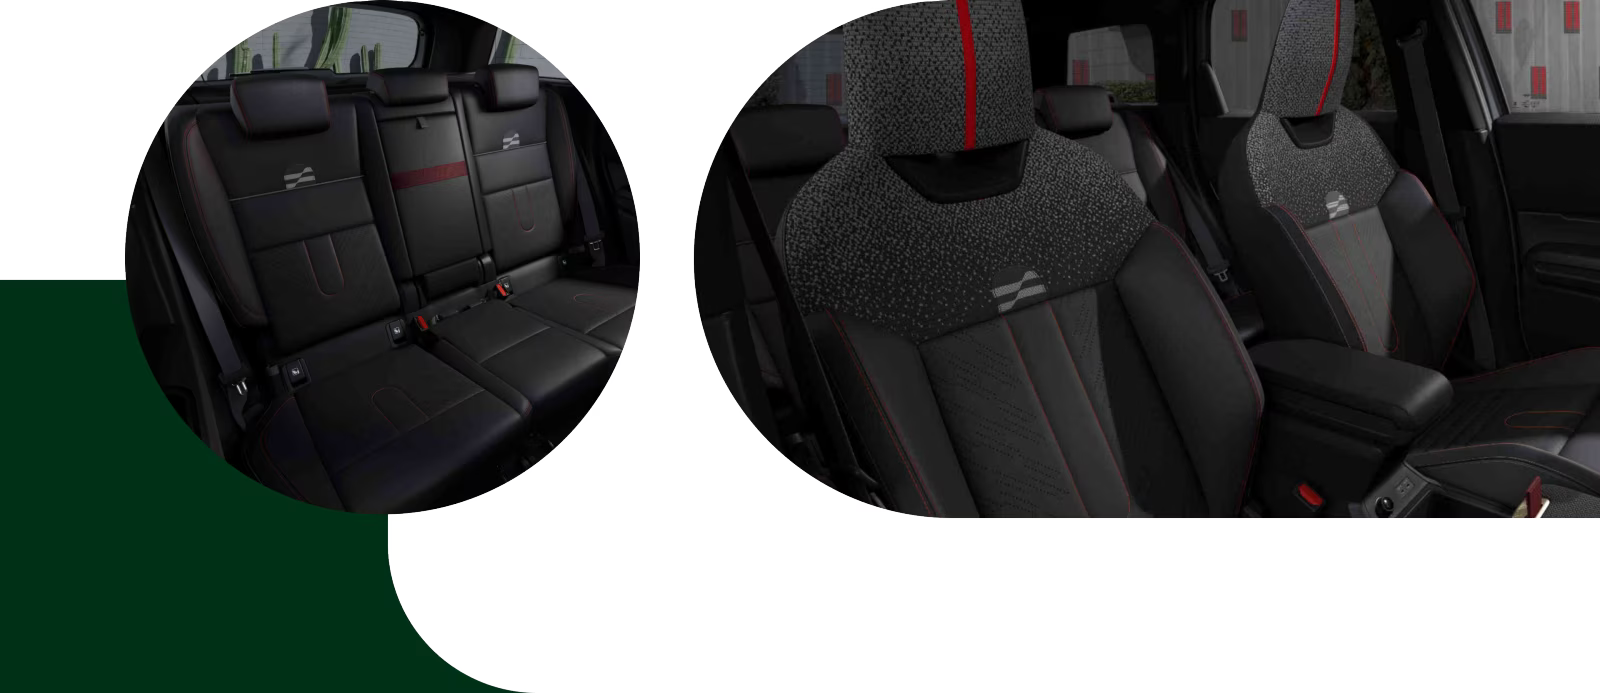 View of the perforated Vescin back-row seating in a MINI JCW Countryman ALL4 from the perspective of the front row. | View of the perforated Vescin seating of a MINI JCW Countryman ALL4 from the perspective of the front passenger’s seat.